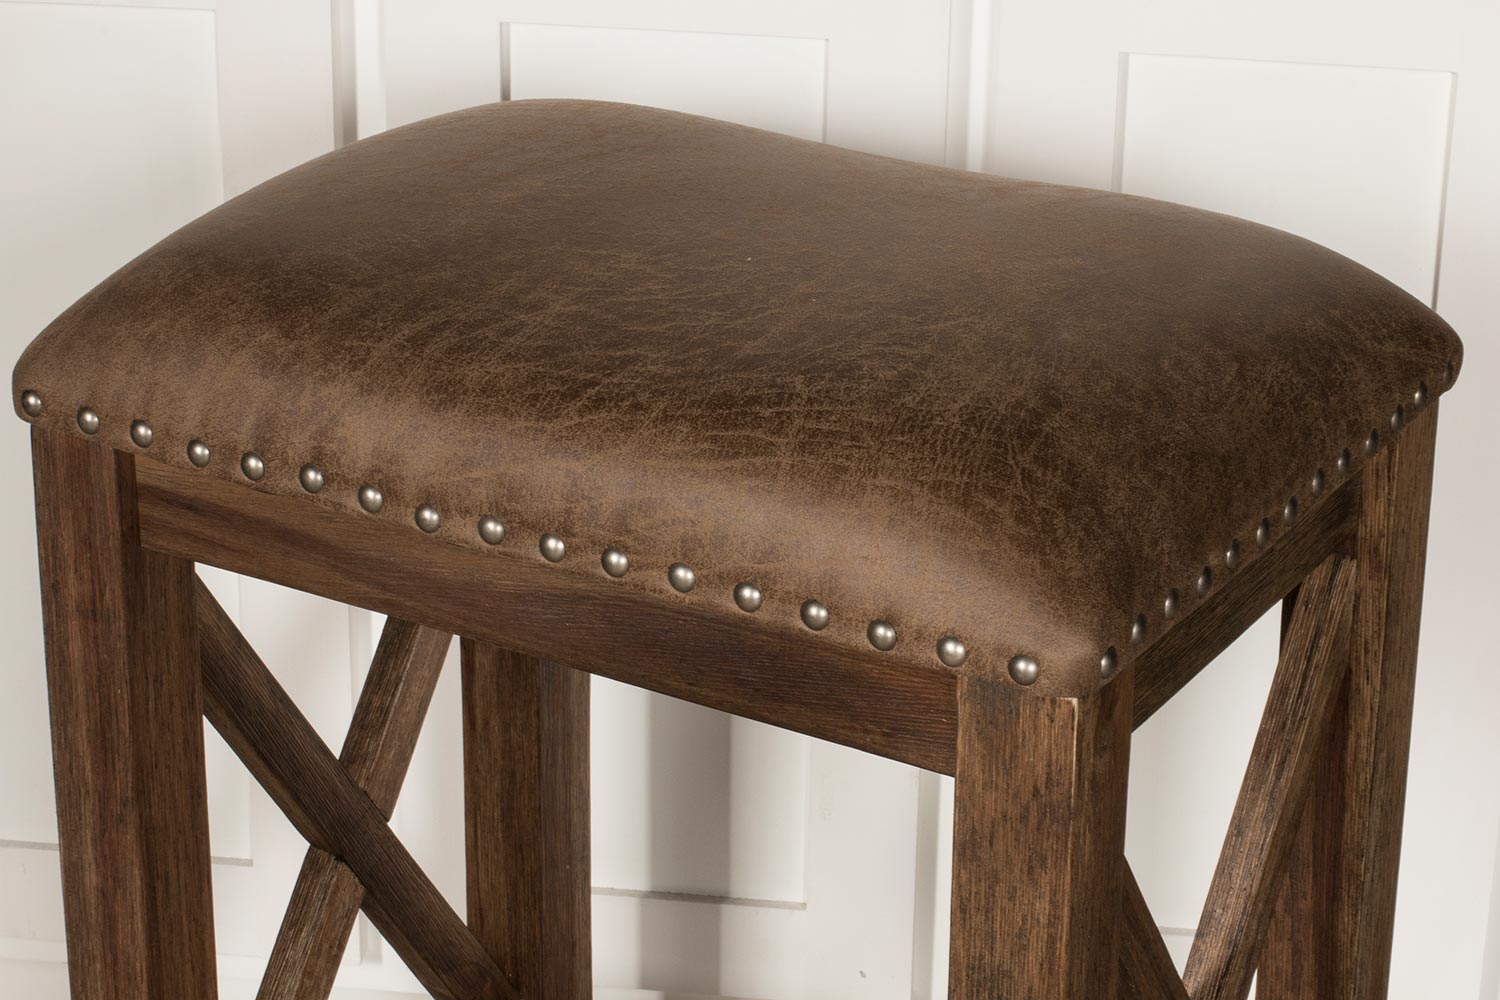 Hillsdale Willow Bend Wood Backless Counter Height Stool - Set of 2 - Antique Brown Walnut